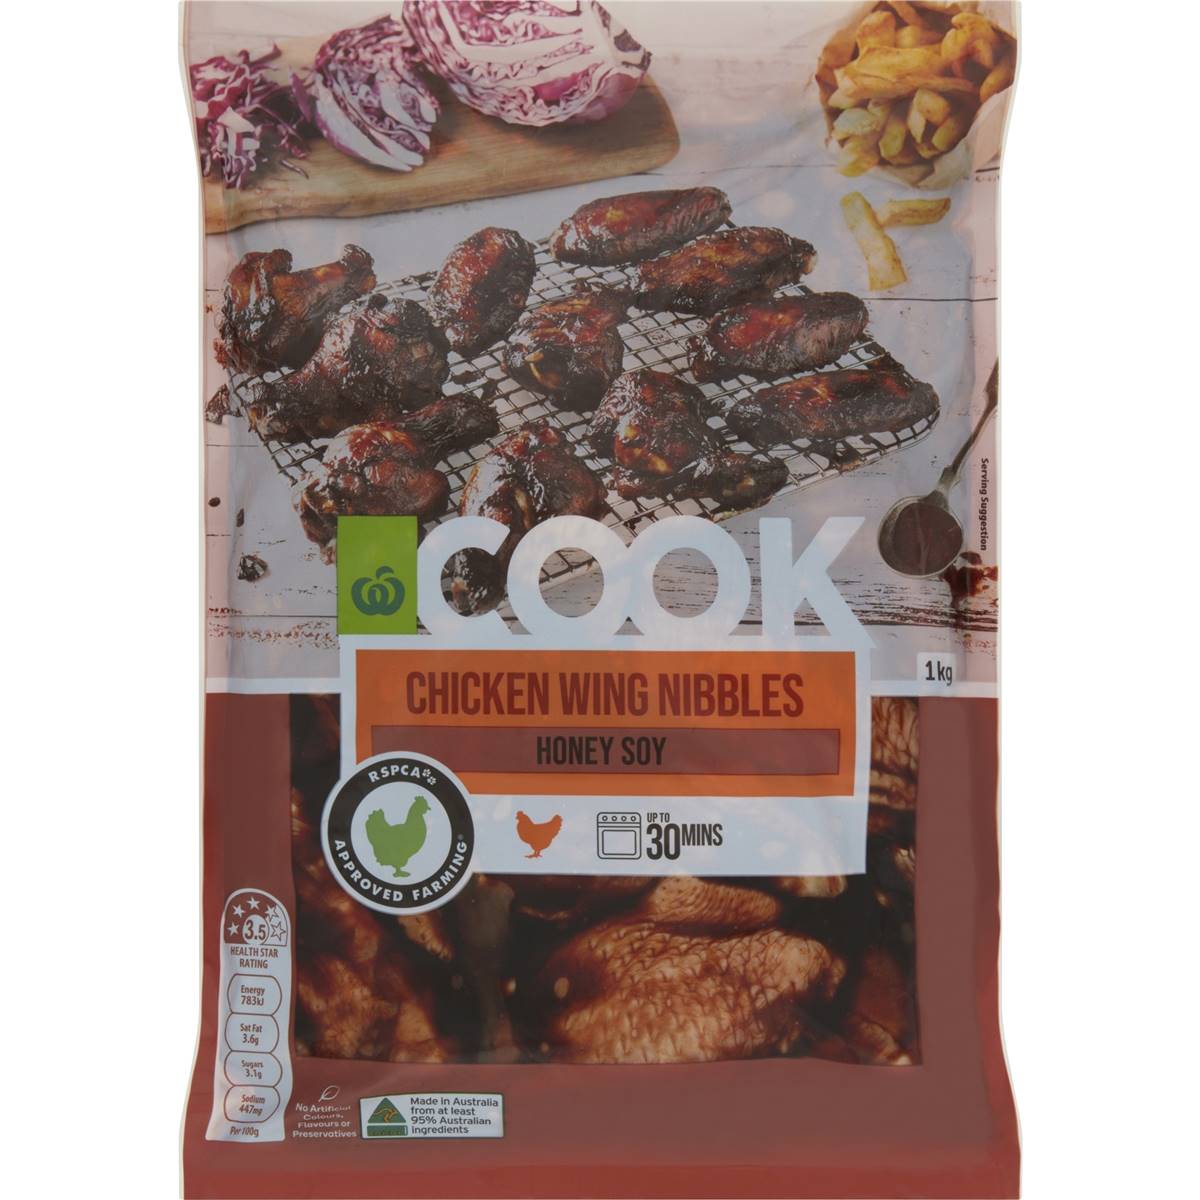 Calories in Woolworths Cook Chicken Wing Nibbles Honey Soy